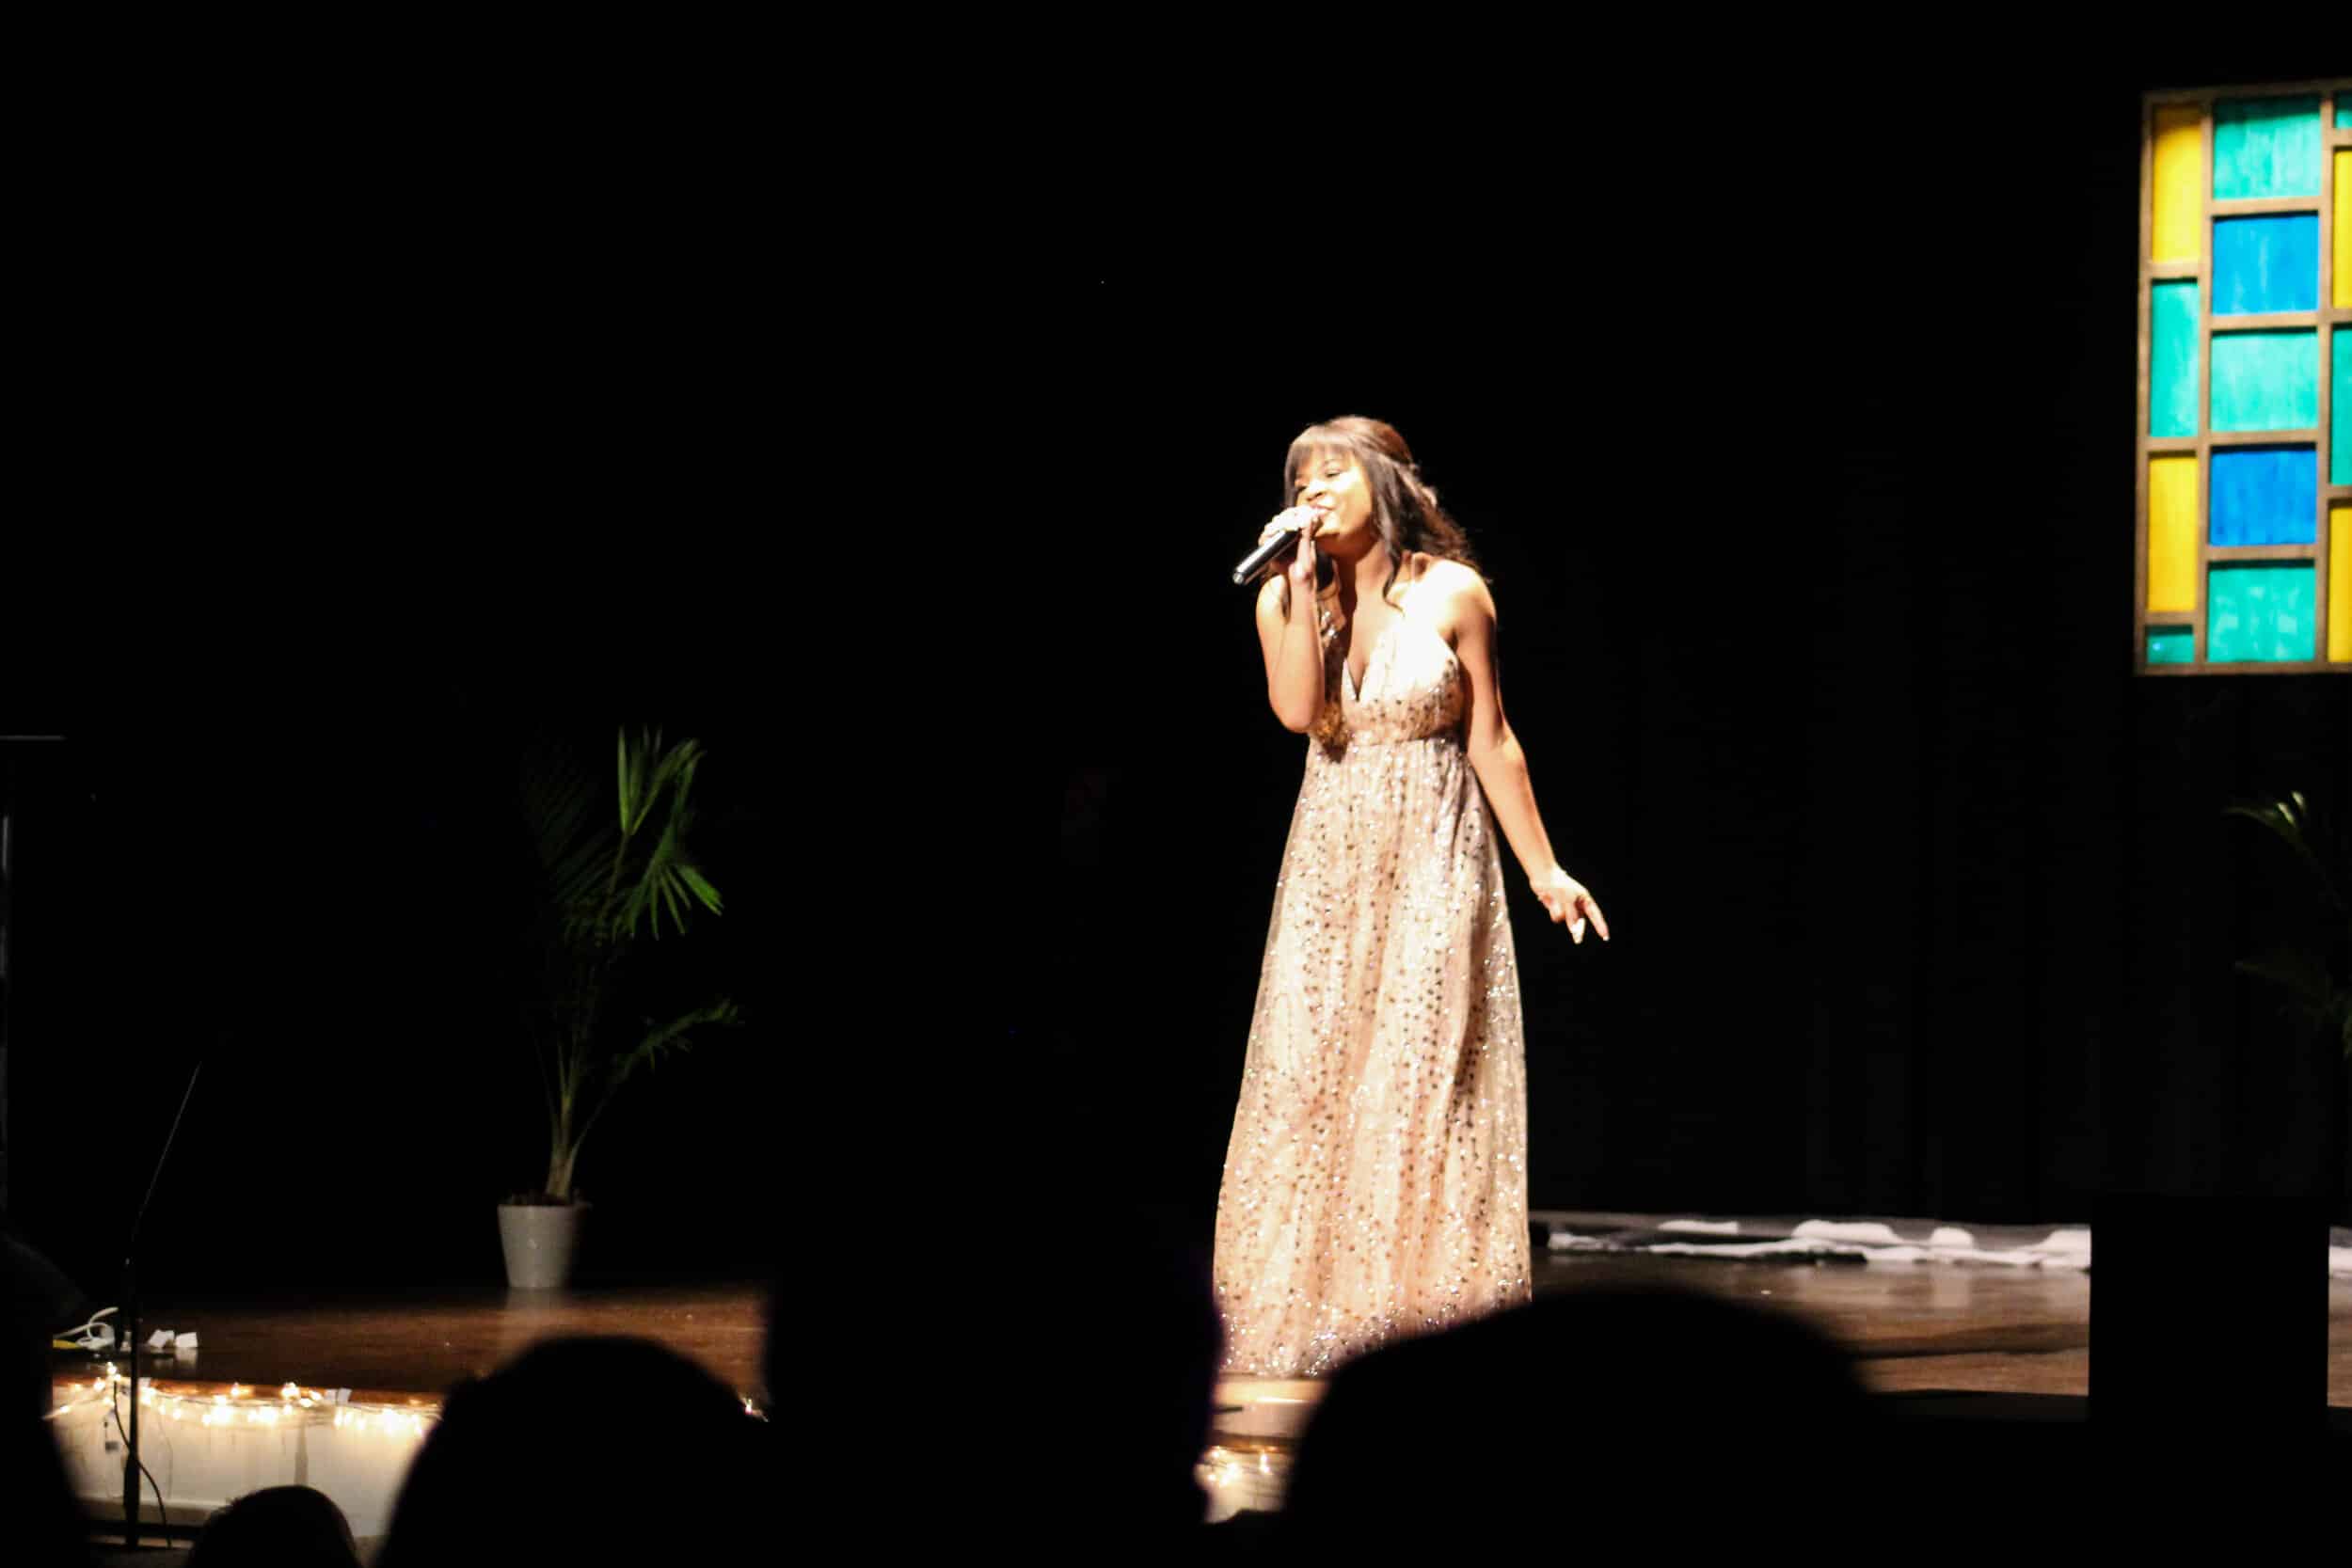 Genesis Williams, Miss NGU Contestant, singing for the talent portion.